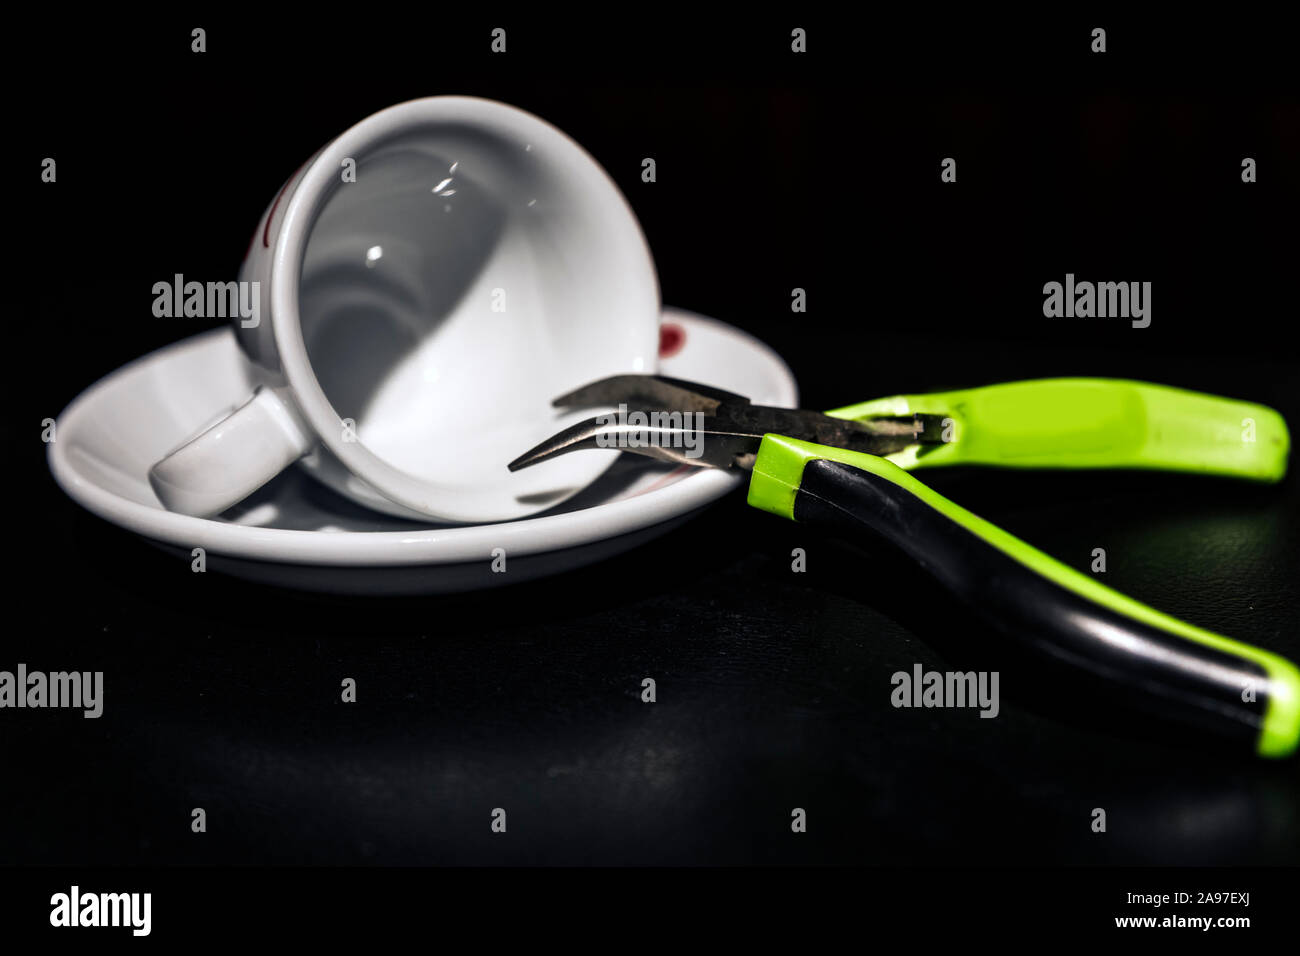 Interior shot of needle nose pliers sticking nose into an empty espresso cup on neutral black background. Stock Photo